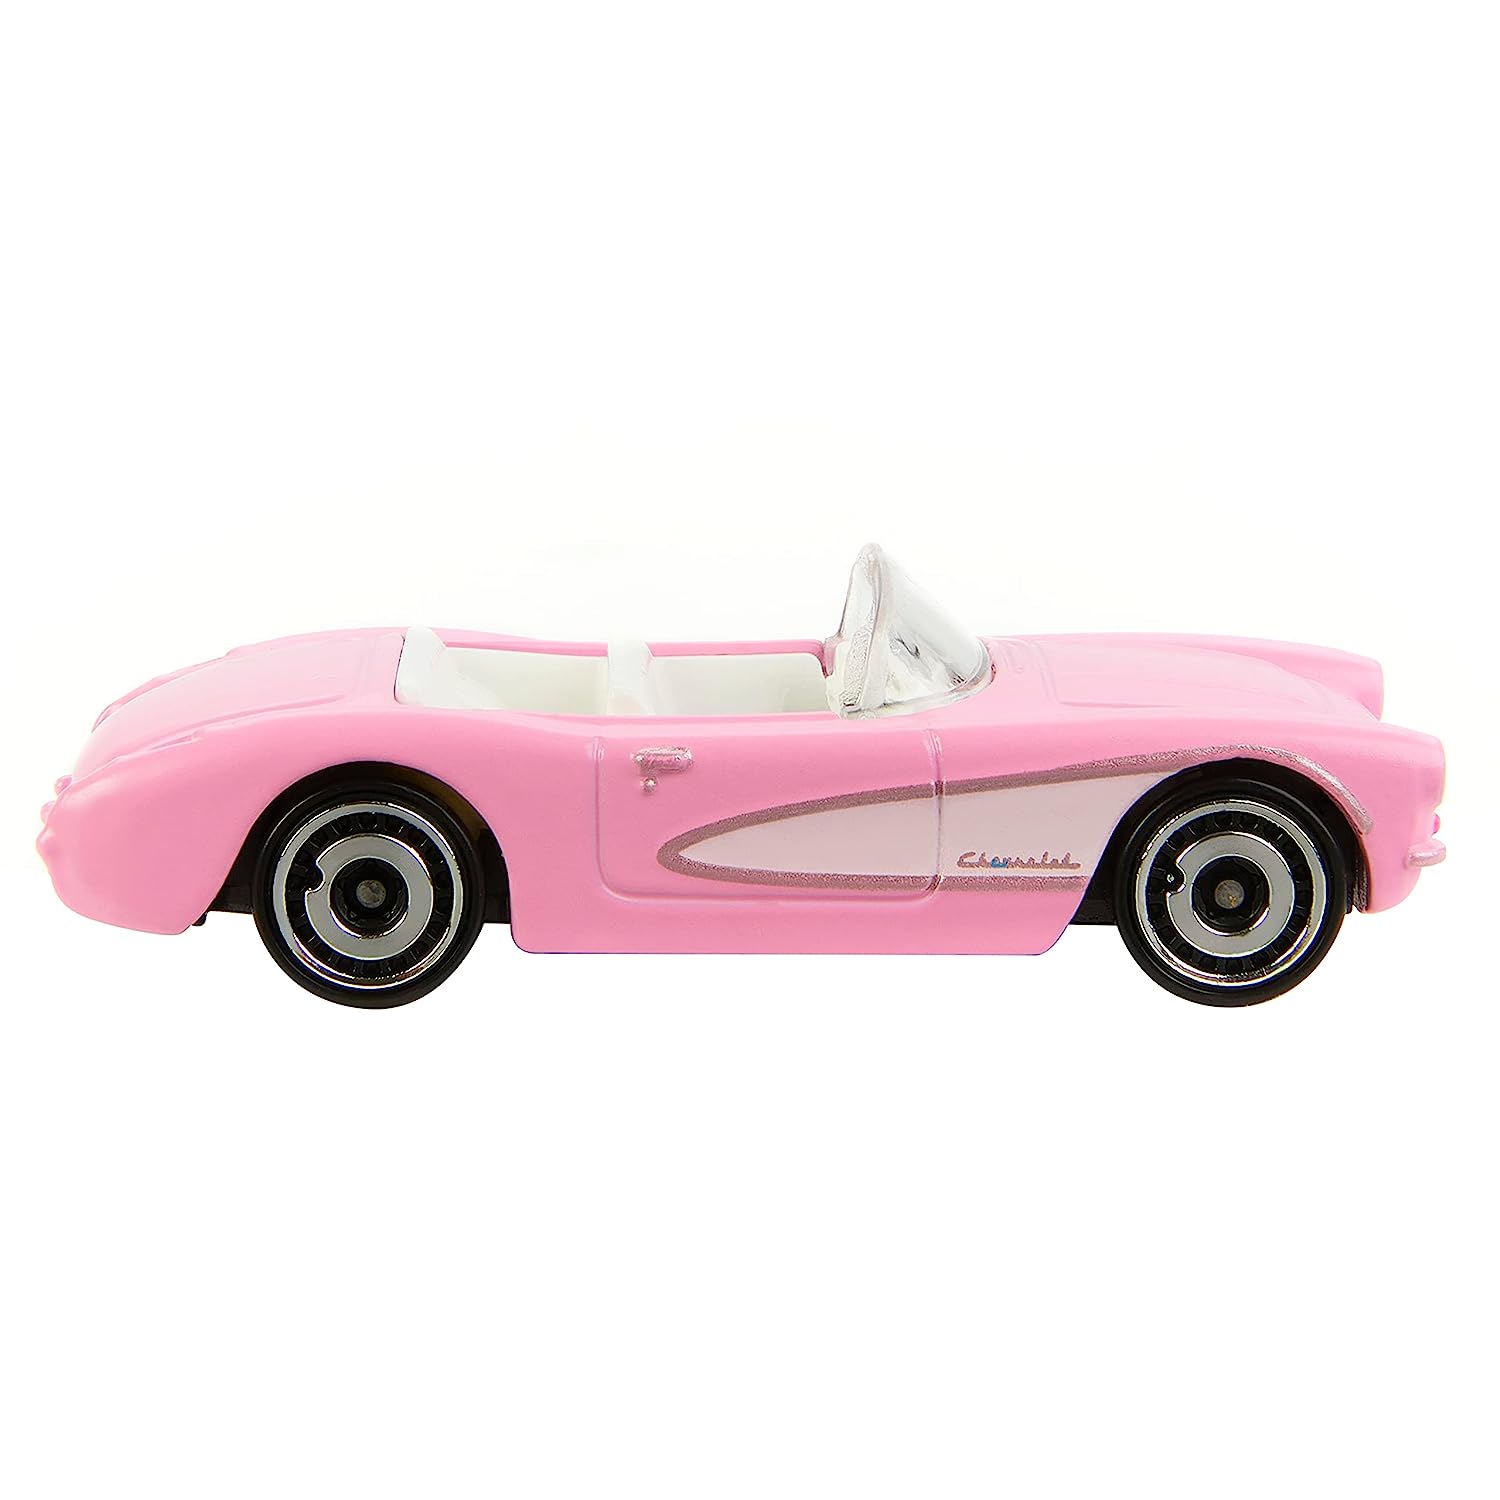 Hot Wheels Barbie The Movie Pink Corvette 1:64 Scale Die-Cast Car for Kids Ages 3+